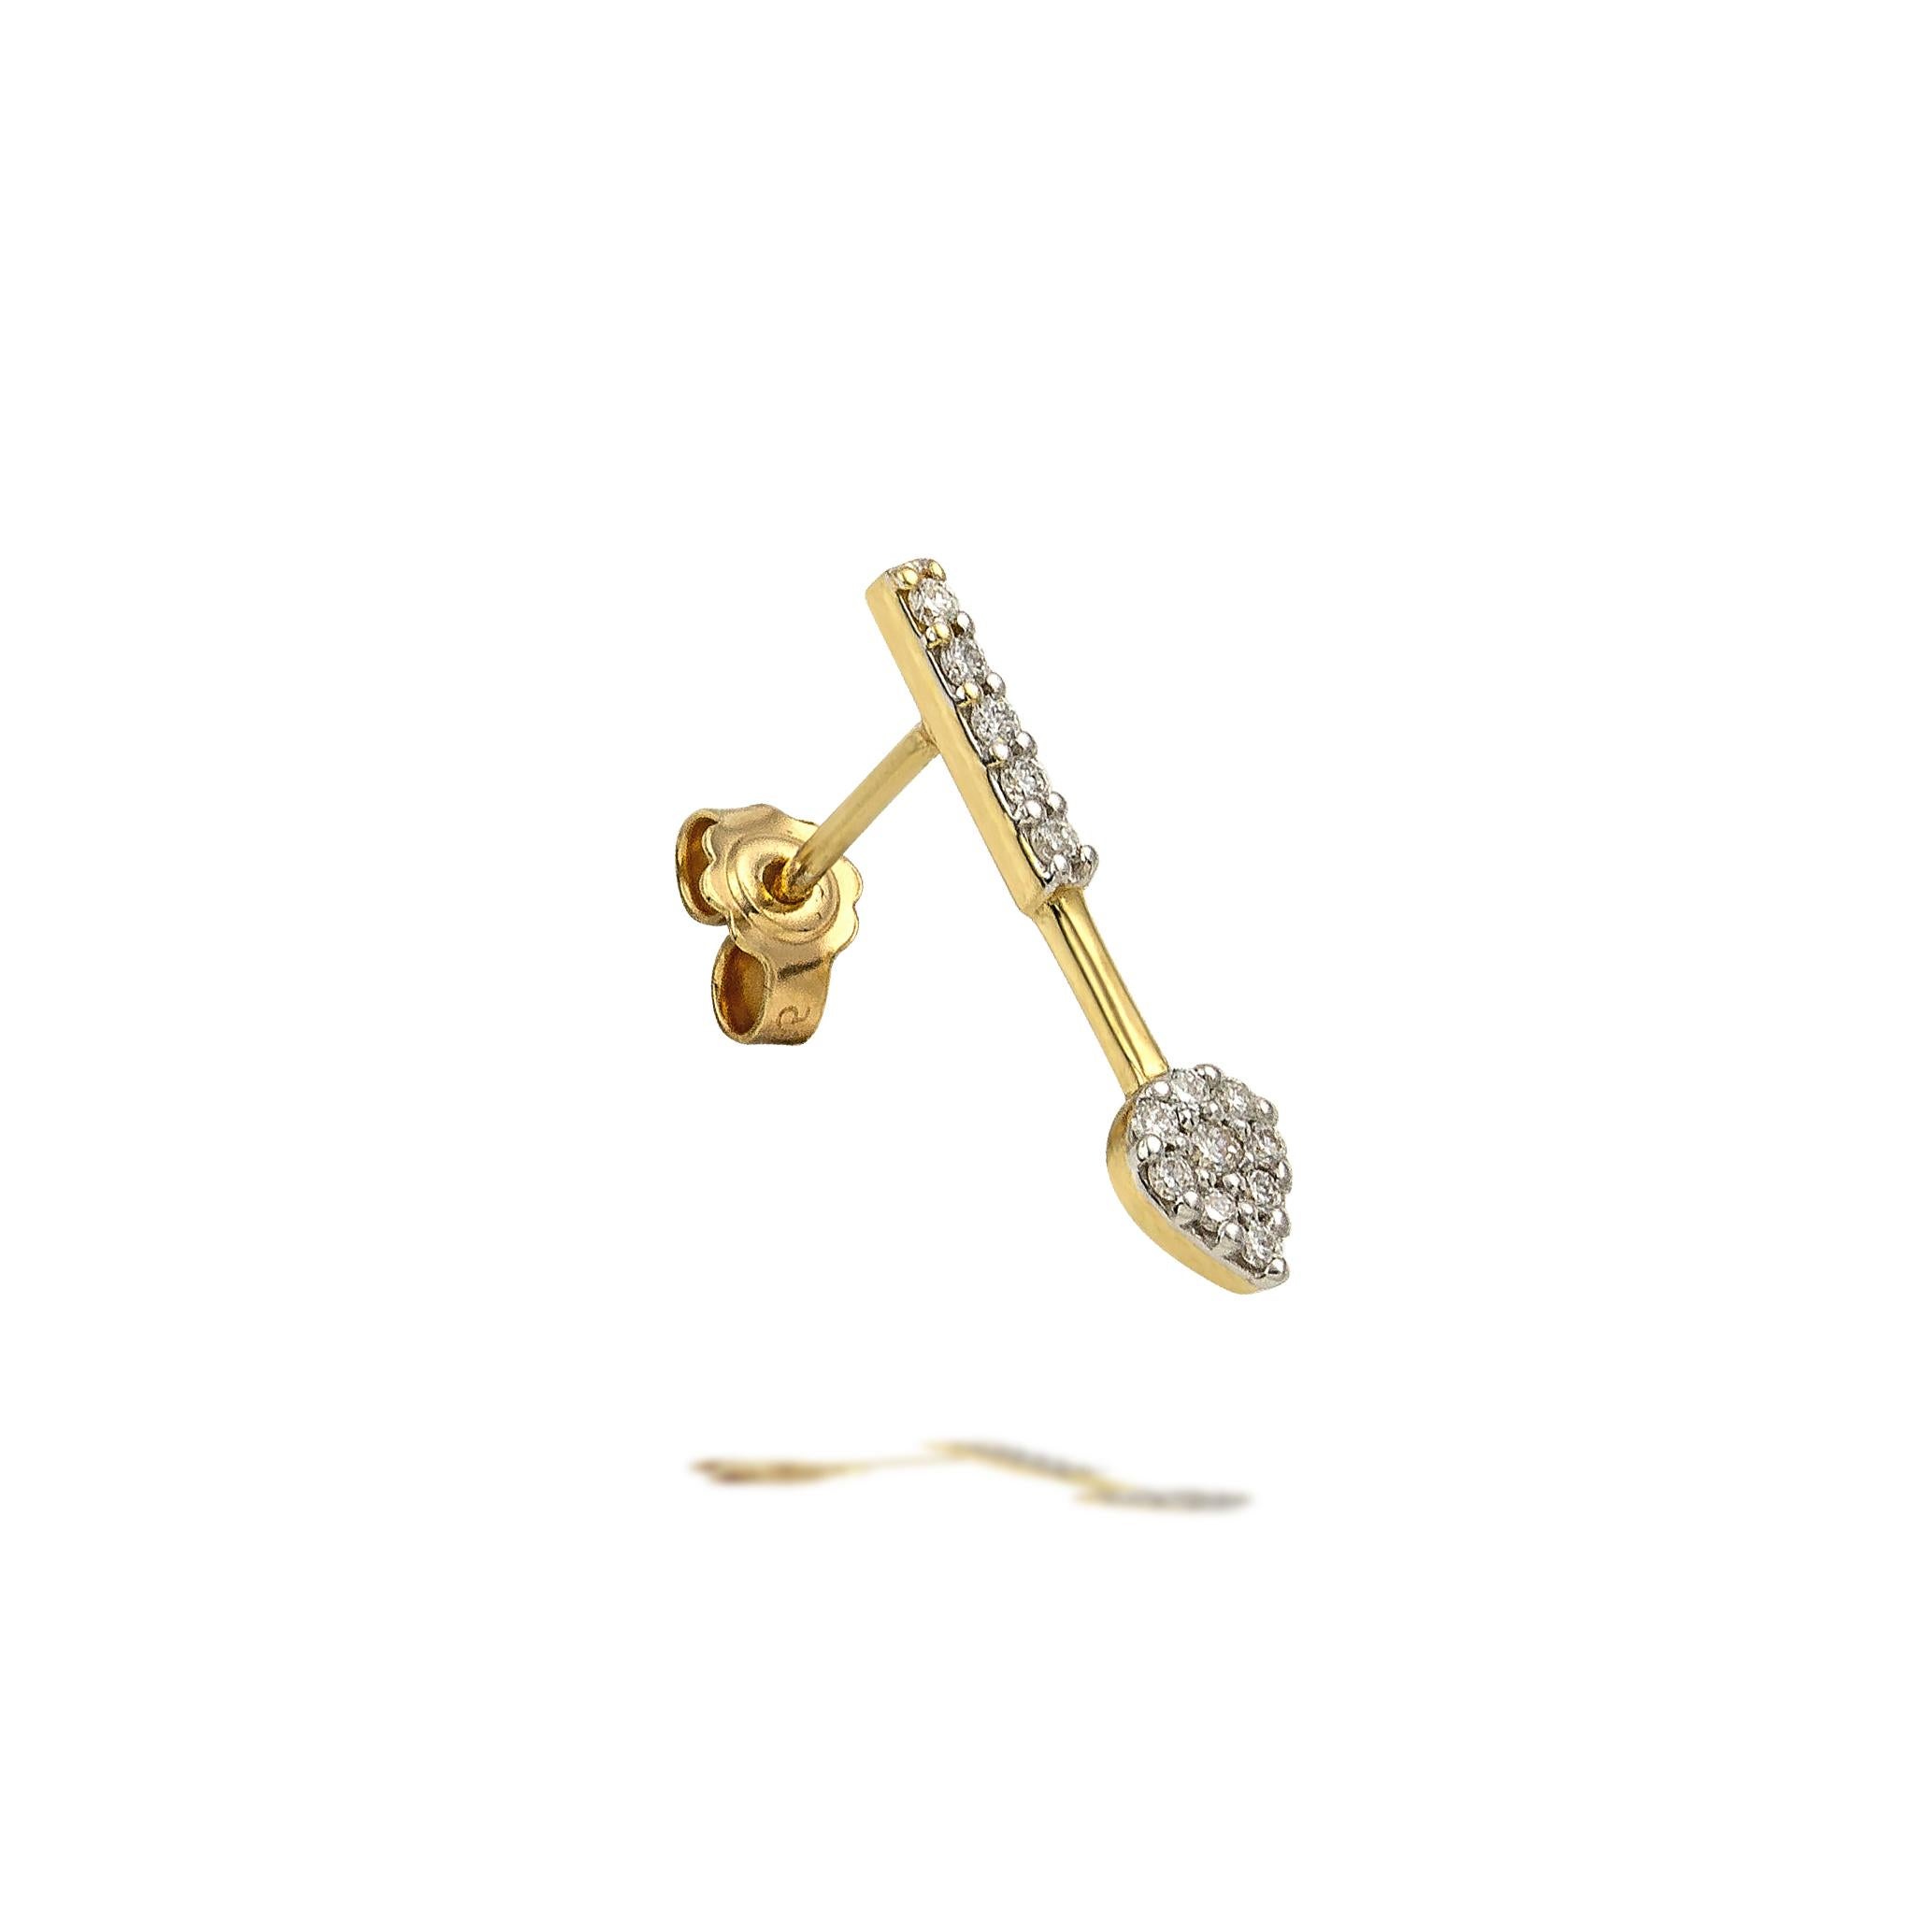 Recycled 14K White Gold

Diamonds Approx. 0.13 ct

Single Floating Pear Diamond Earring in Yellow Gold and Diamonds

This collection combines the simplicity of the single piece with the opulence of diamonds.

All jewels in the Essentials – Mix &